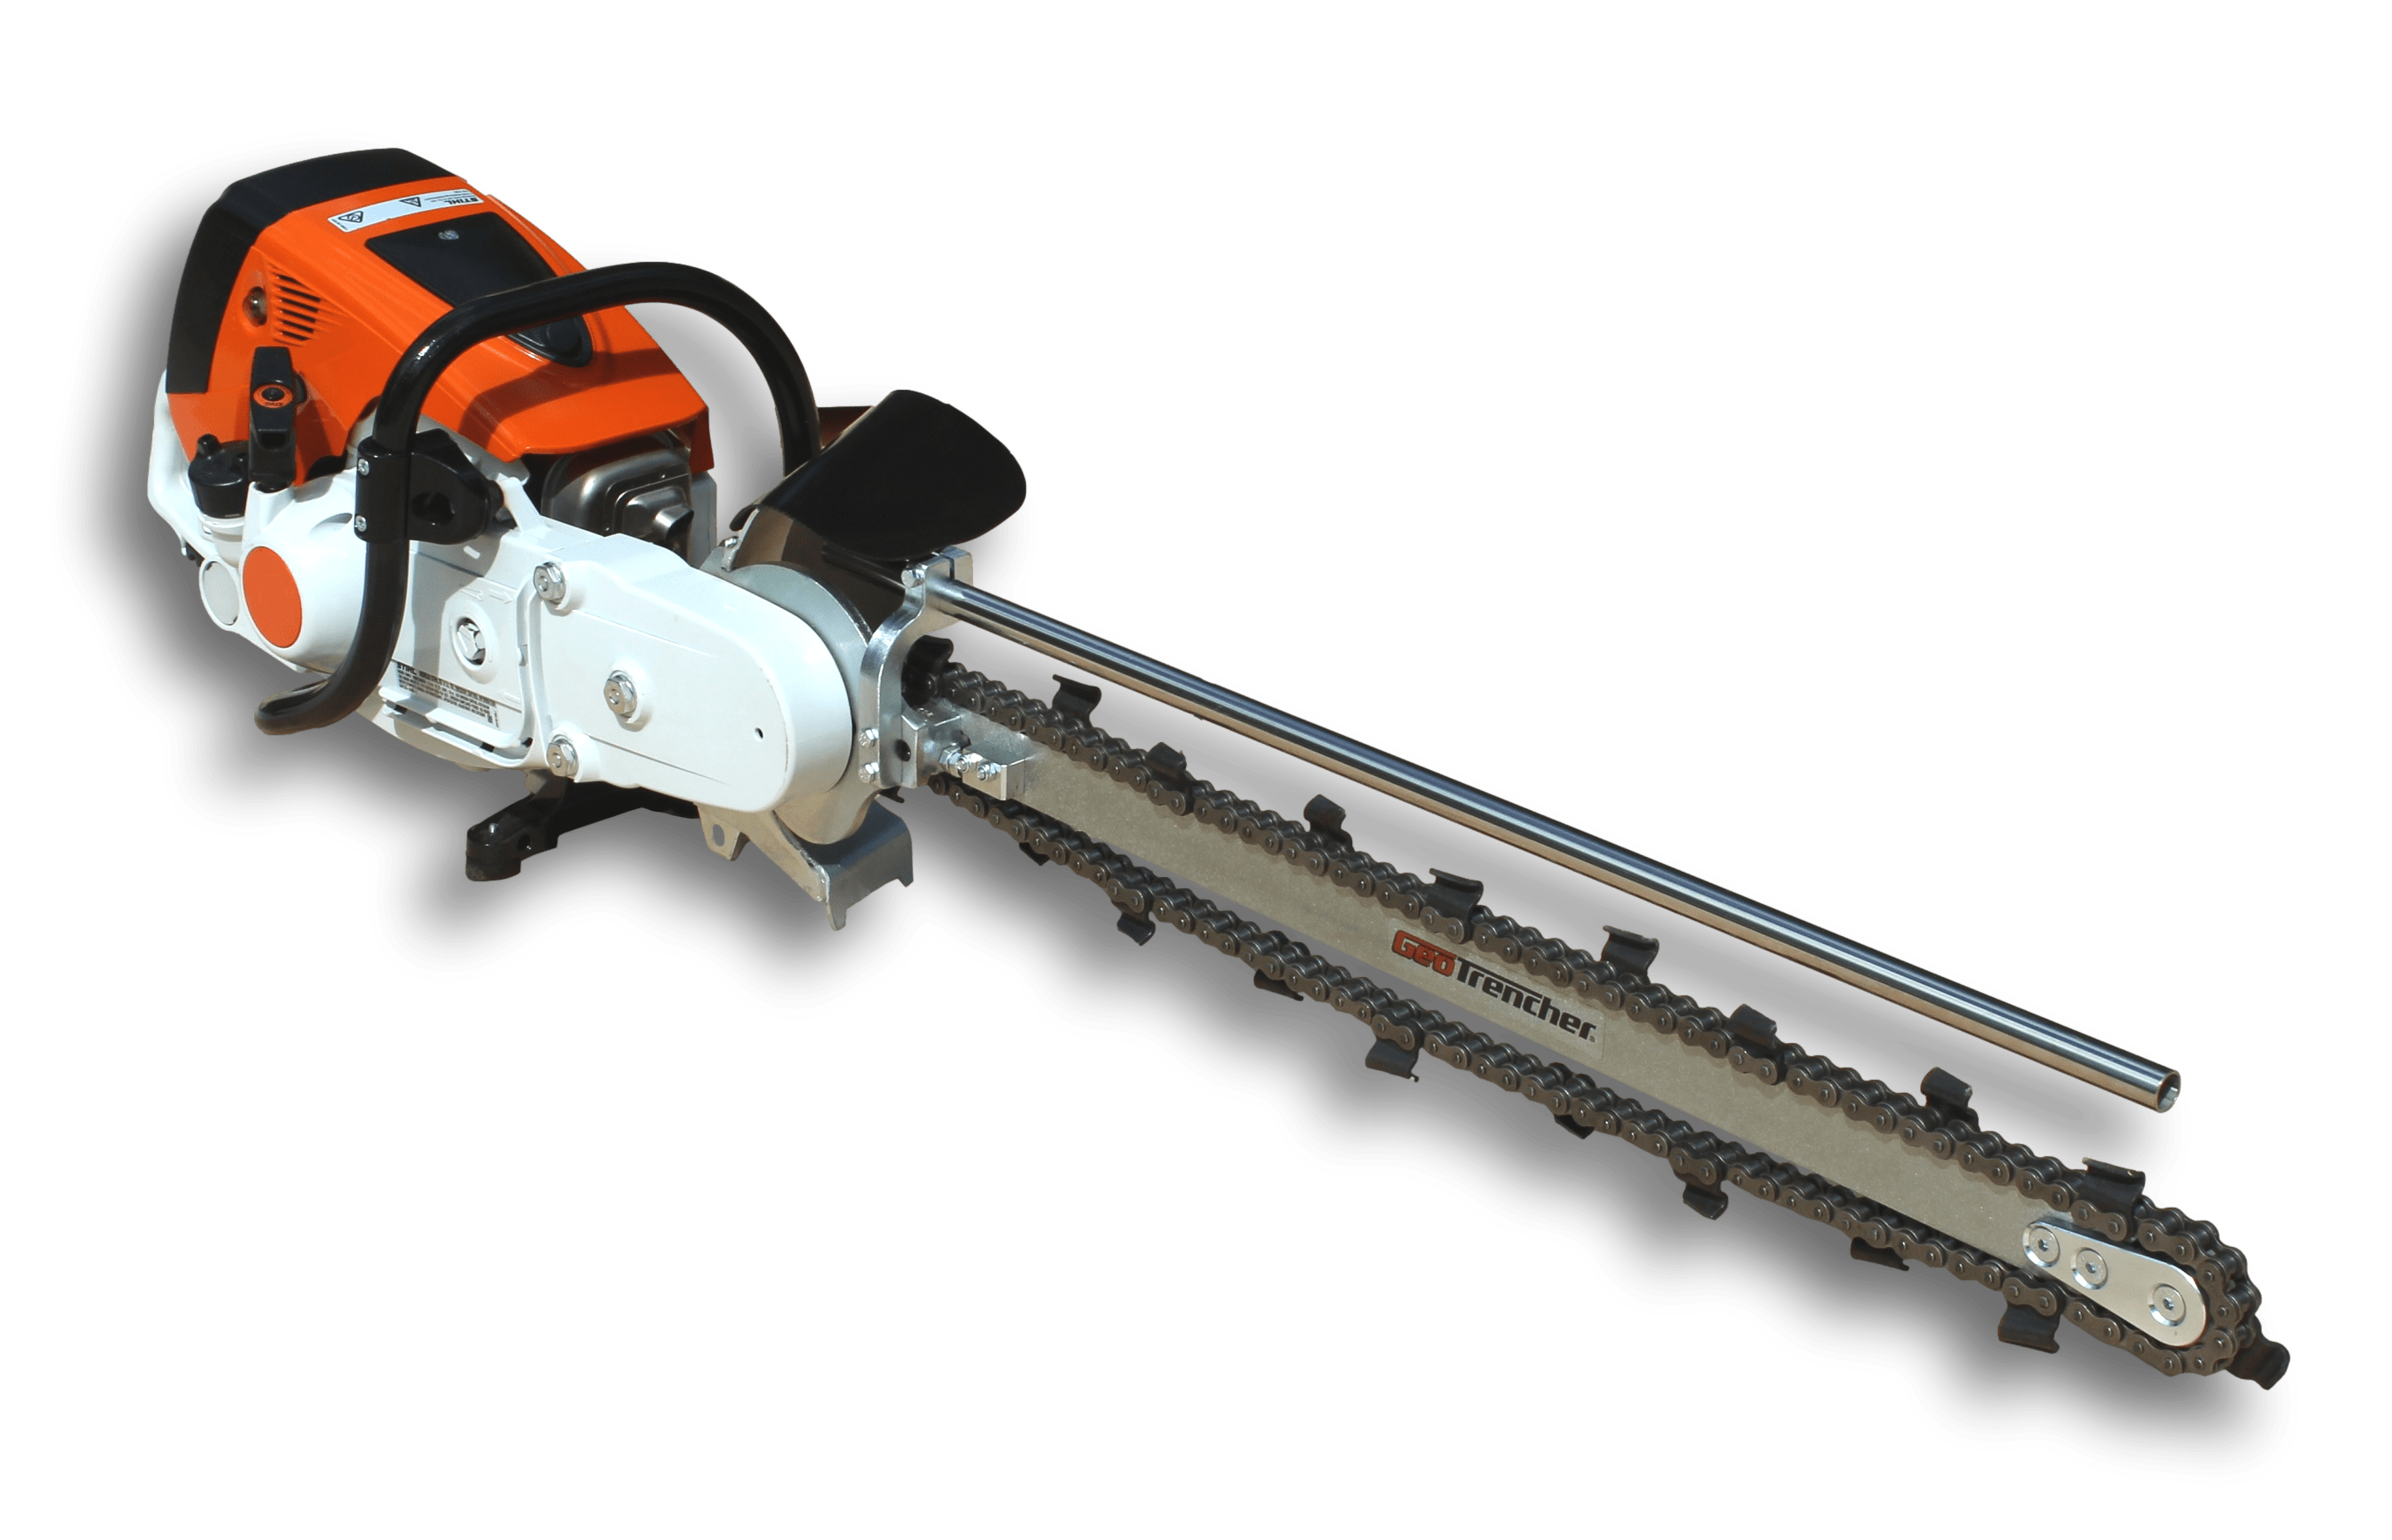 https://geotrencher.com.au/wp-content/uploads/2022/01/GeoTrencher-With-Stihl-Powerhead-3-1.png